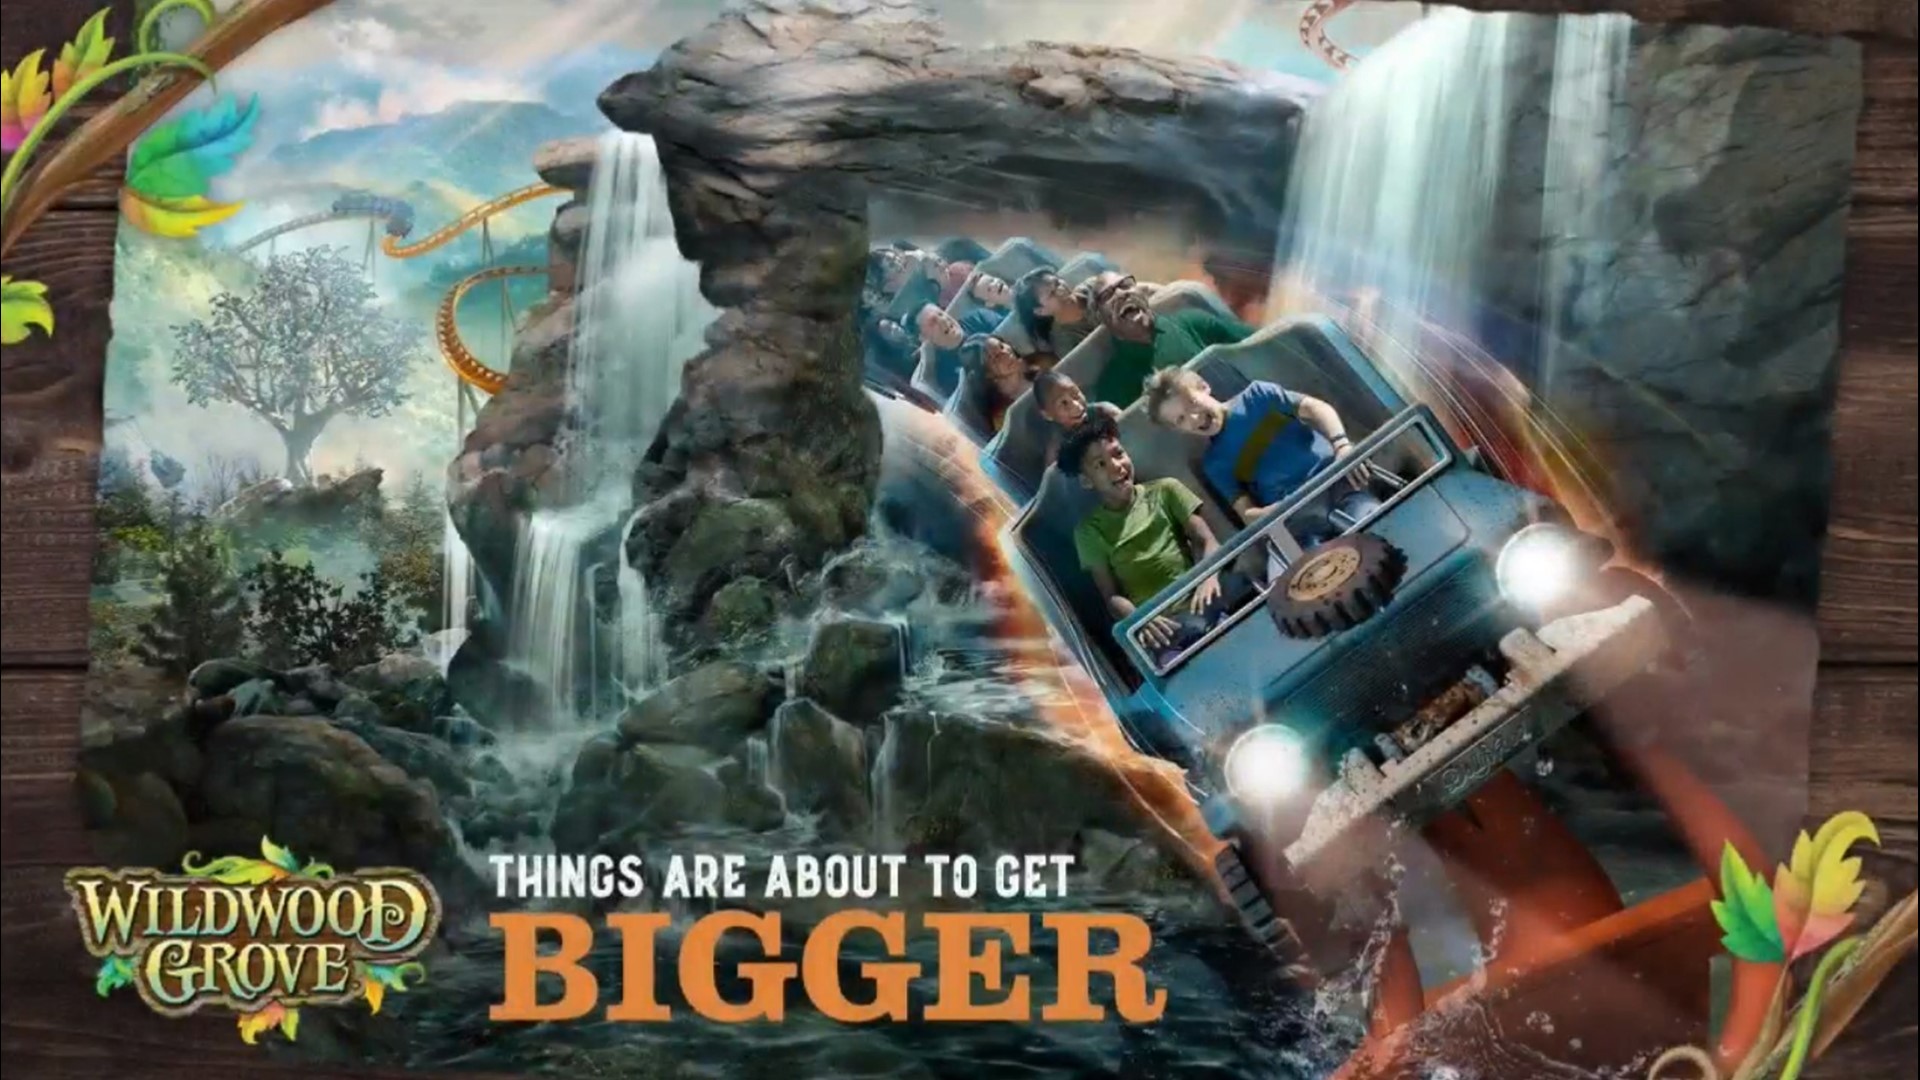 Big Bear Mountain will be the longest and largest roller coaster at Dollywood. It is expected to be open by spring 2023.